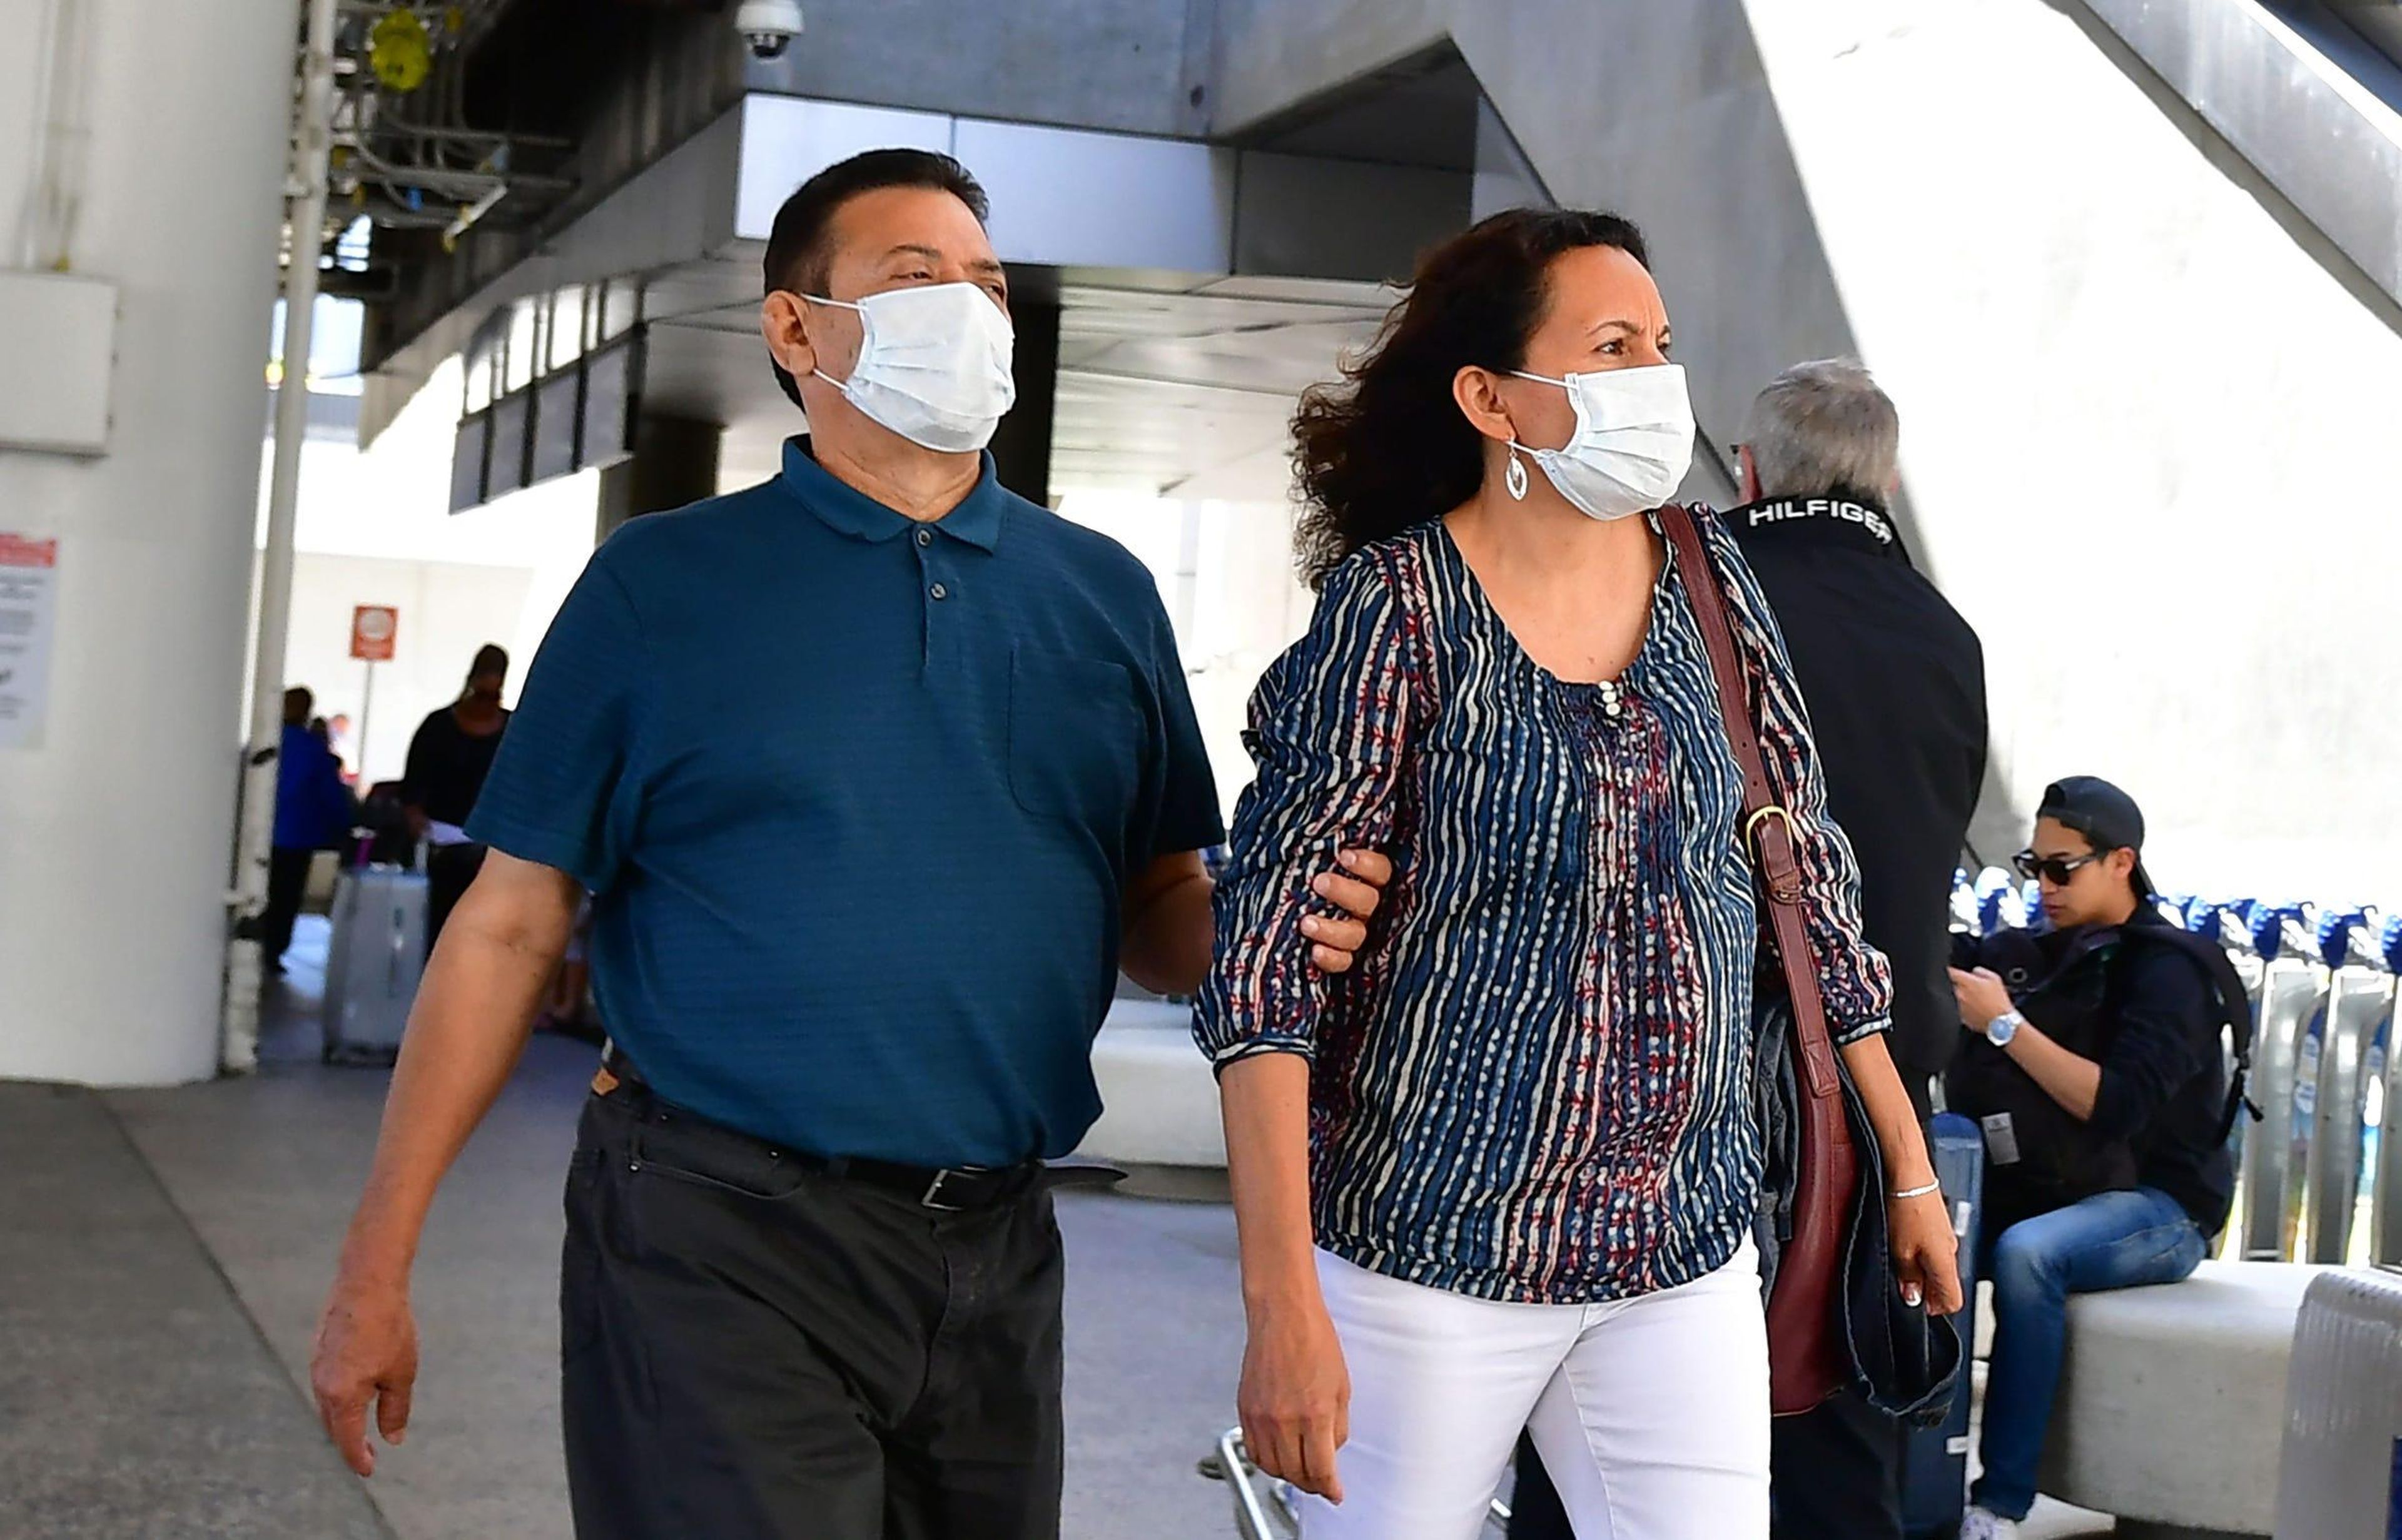 People wear face masks at Los Angeles International Airport (LAX) in Los Angeles, California on March 2, 2020.